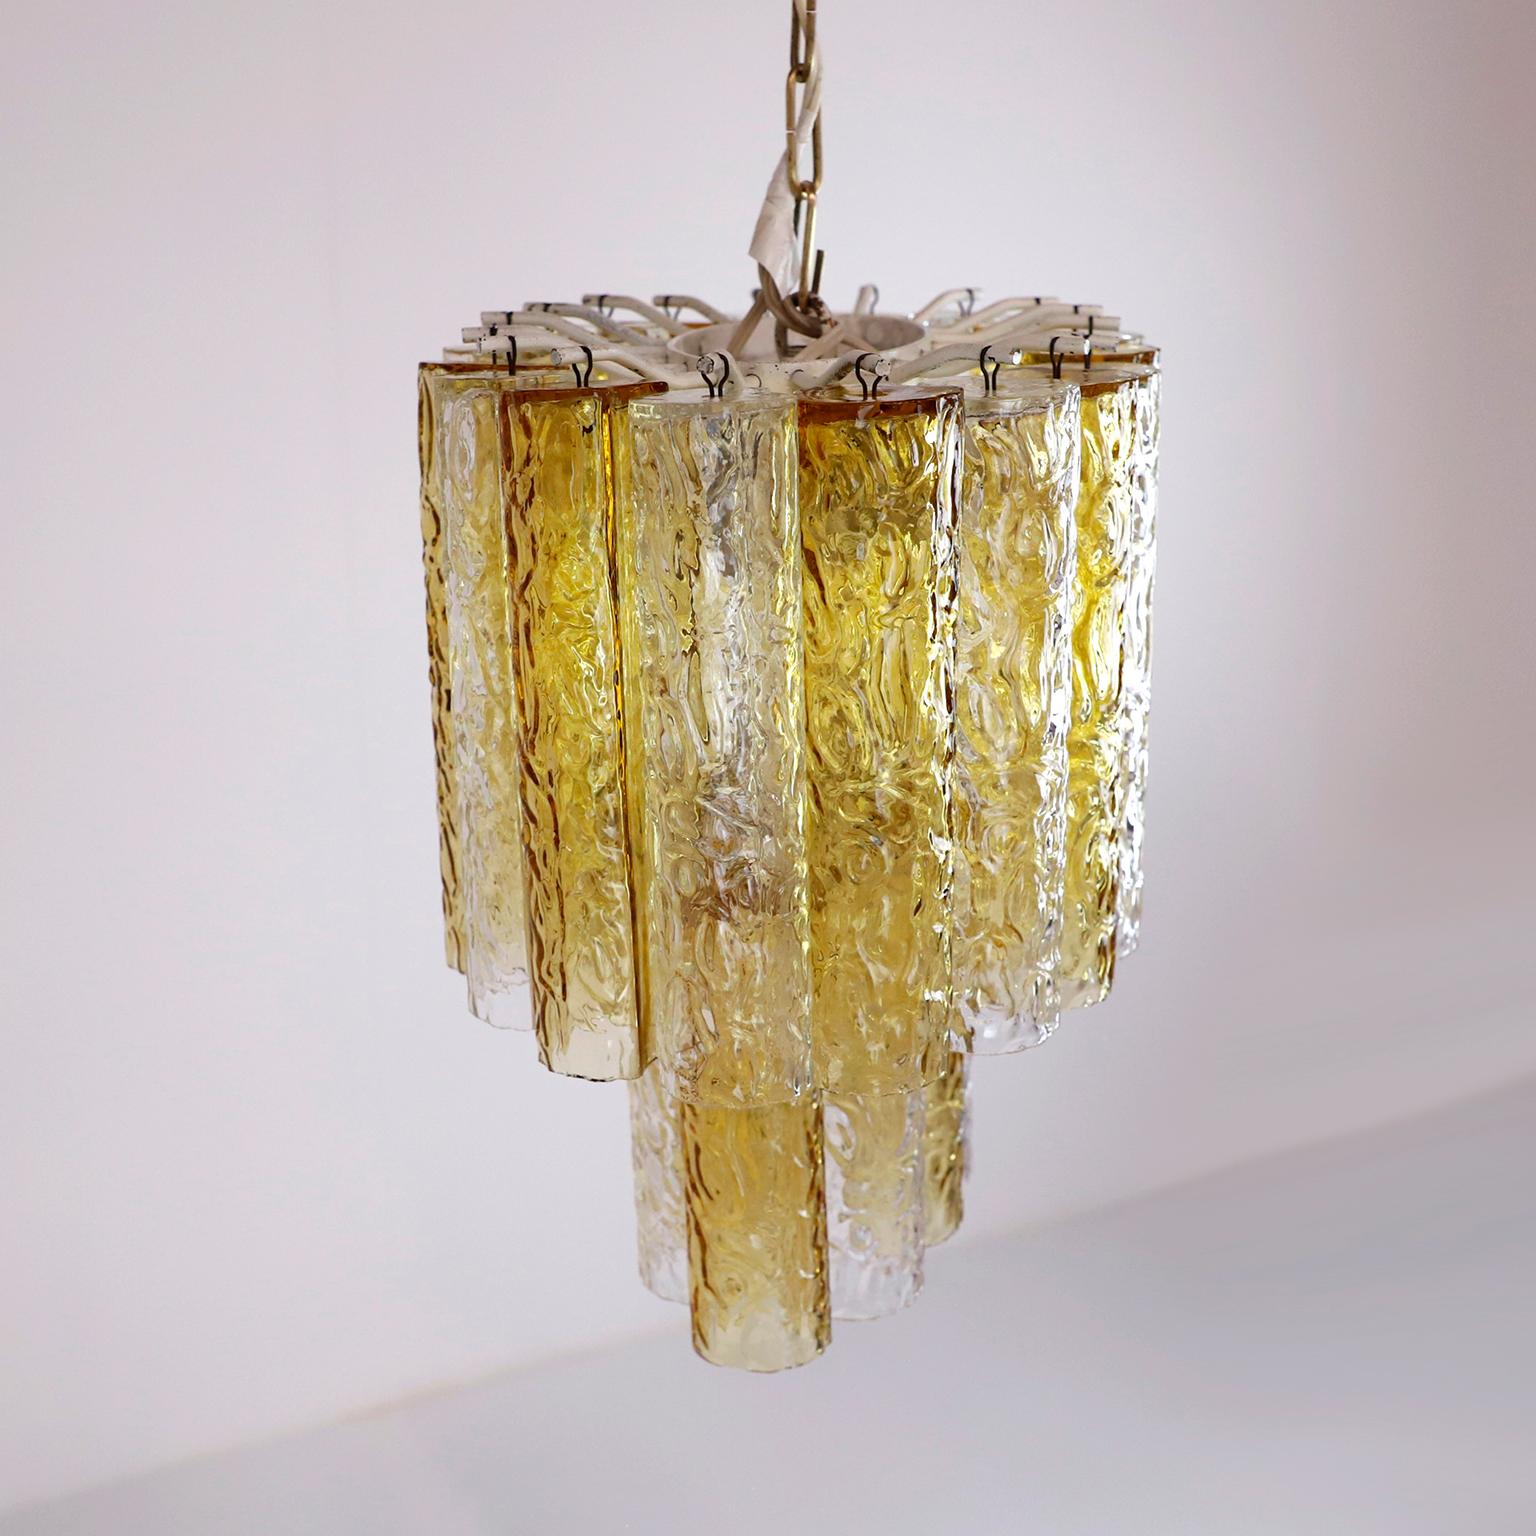 Circa 1970. We offer this Murano Amber and Clear Tronchi Chandelier Venini. The chandelier has a missing piece from the bottom row.